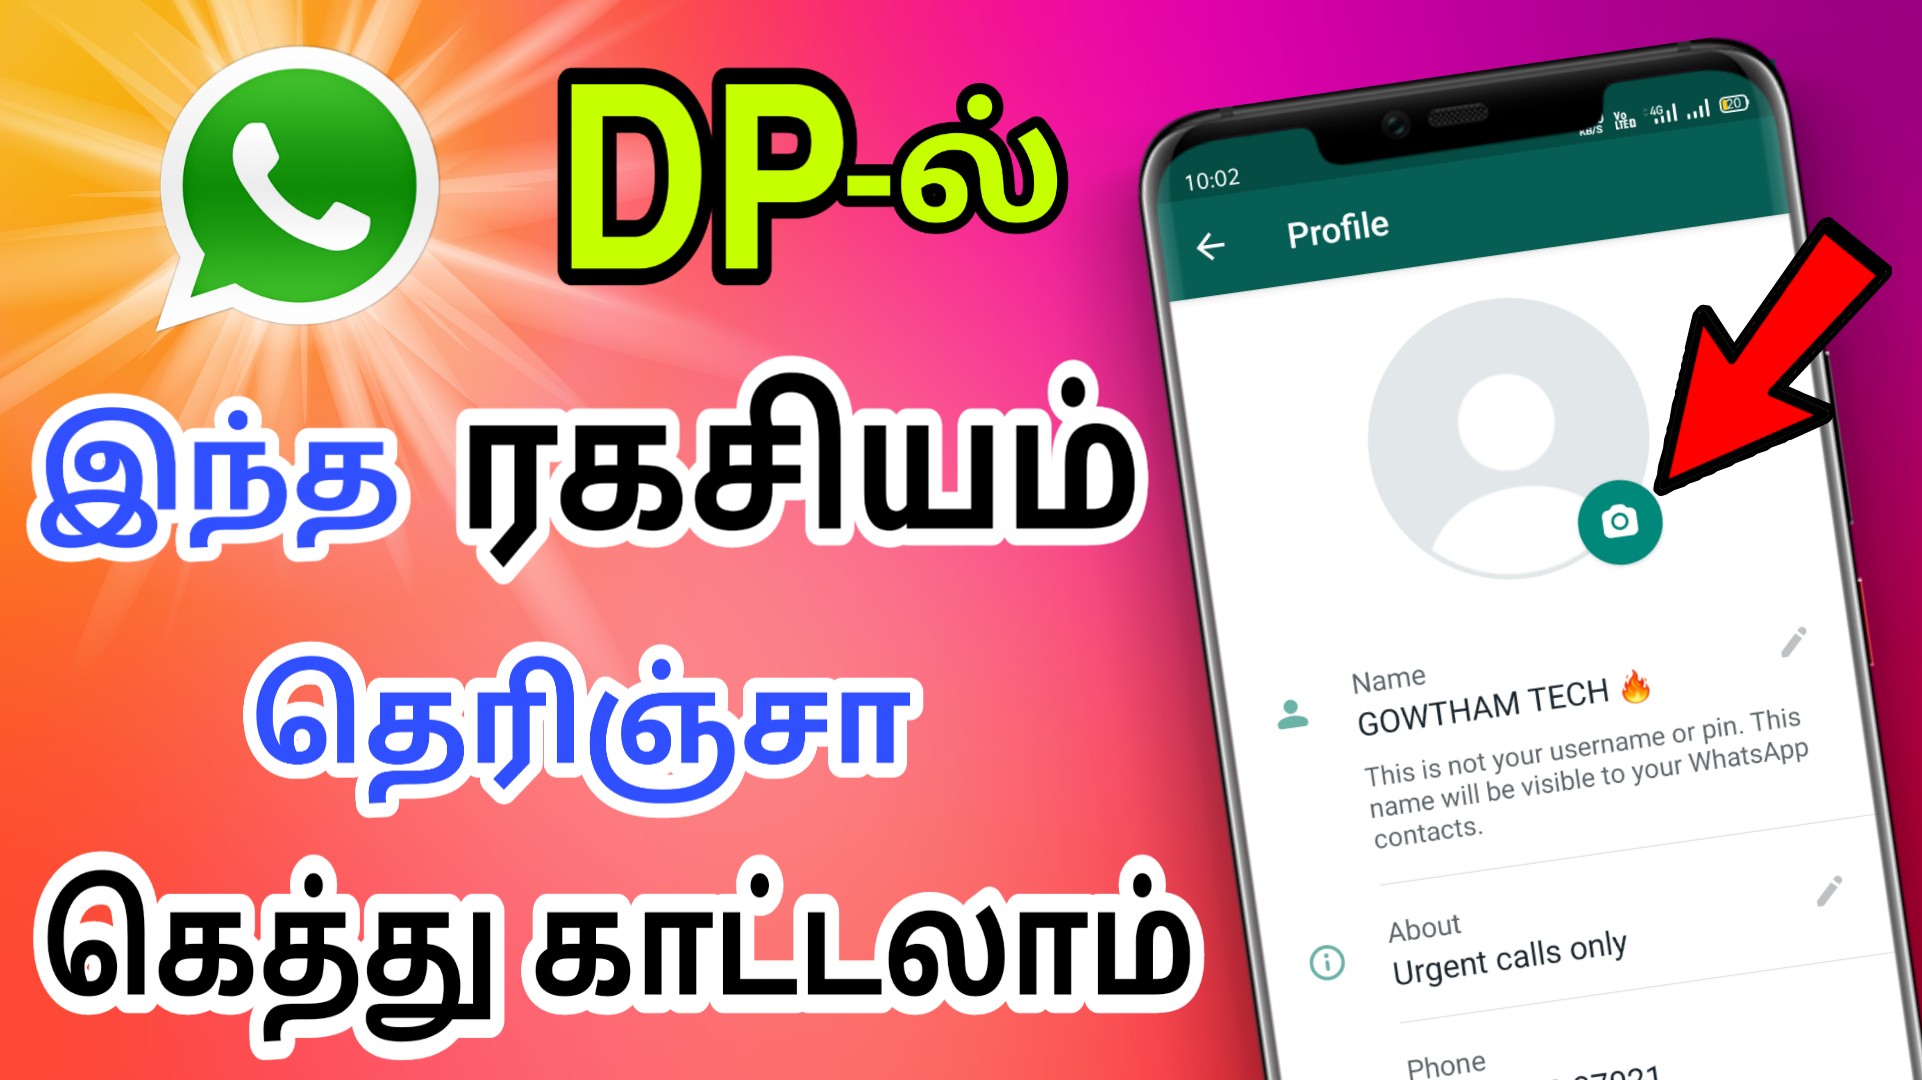 Download] Whatsapp Profile Pictures, Latest Whatsapp DP Images